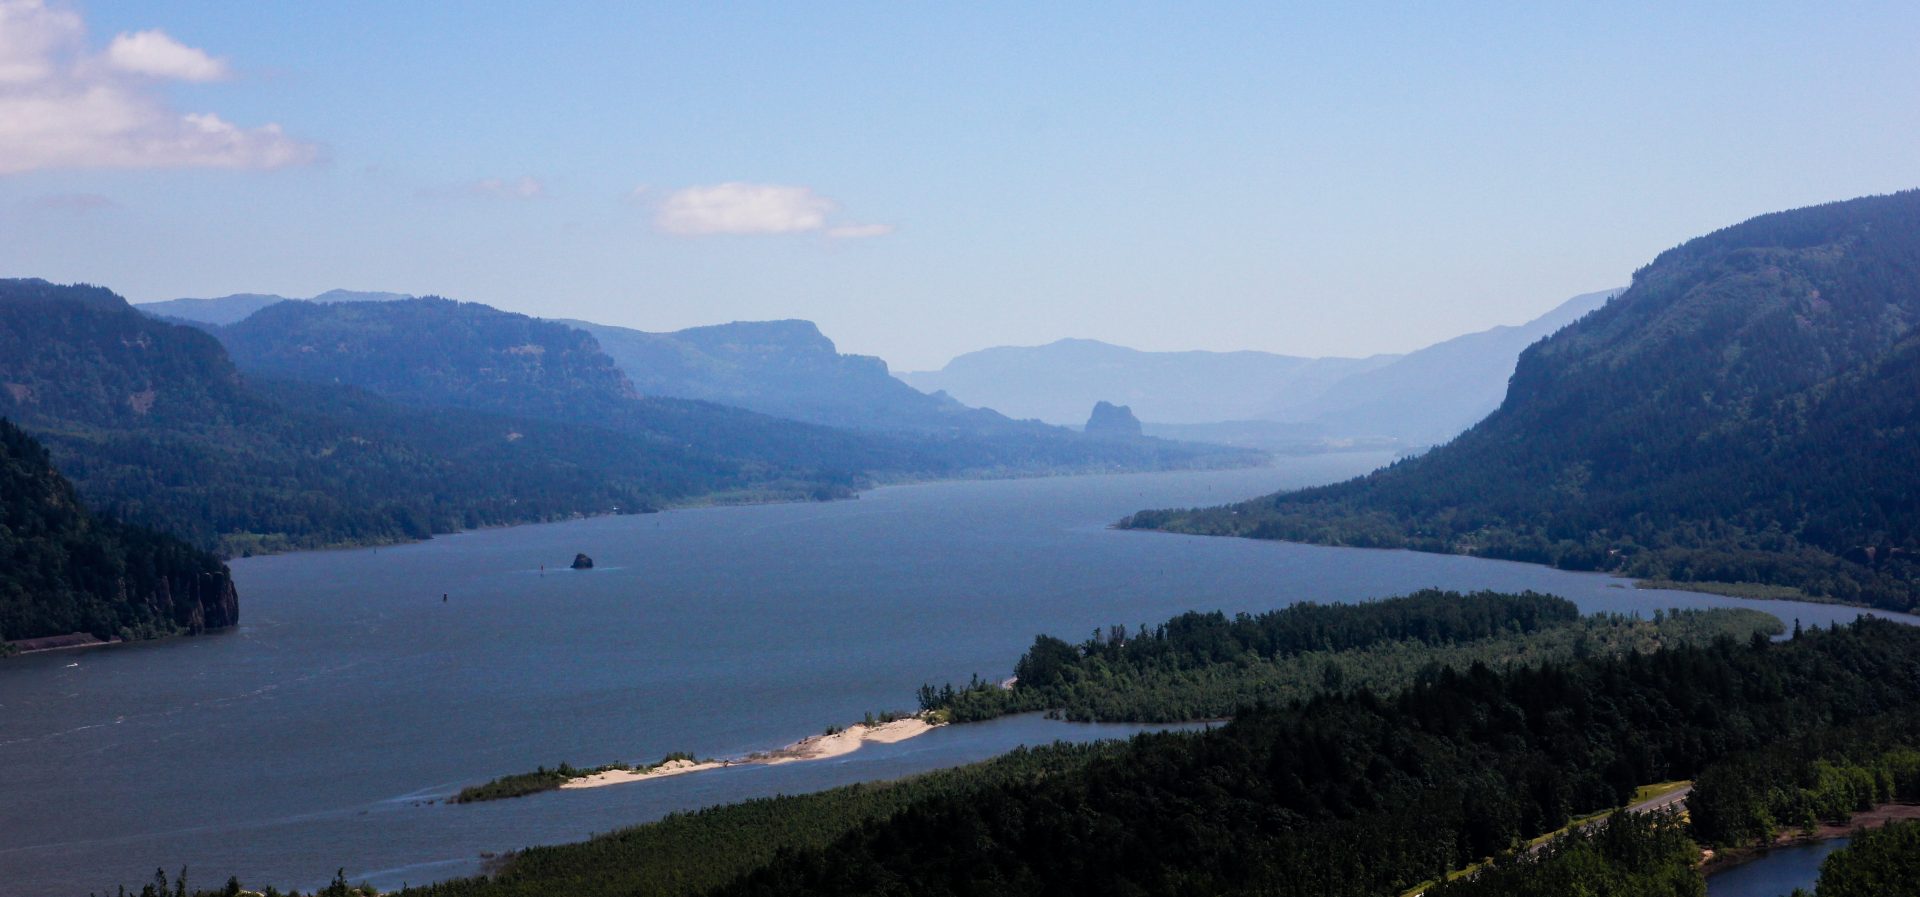 The view of the Columbia River Gorge from the Vista House in Corbett, Oregon